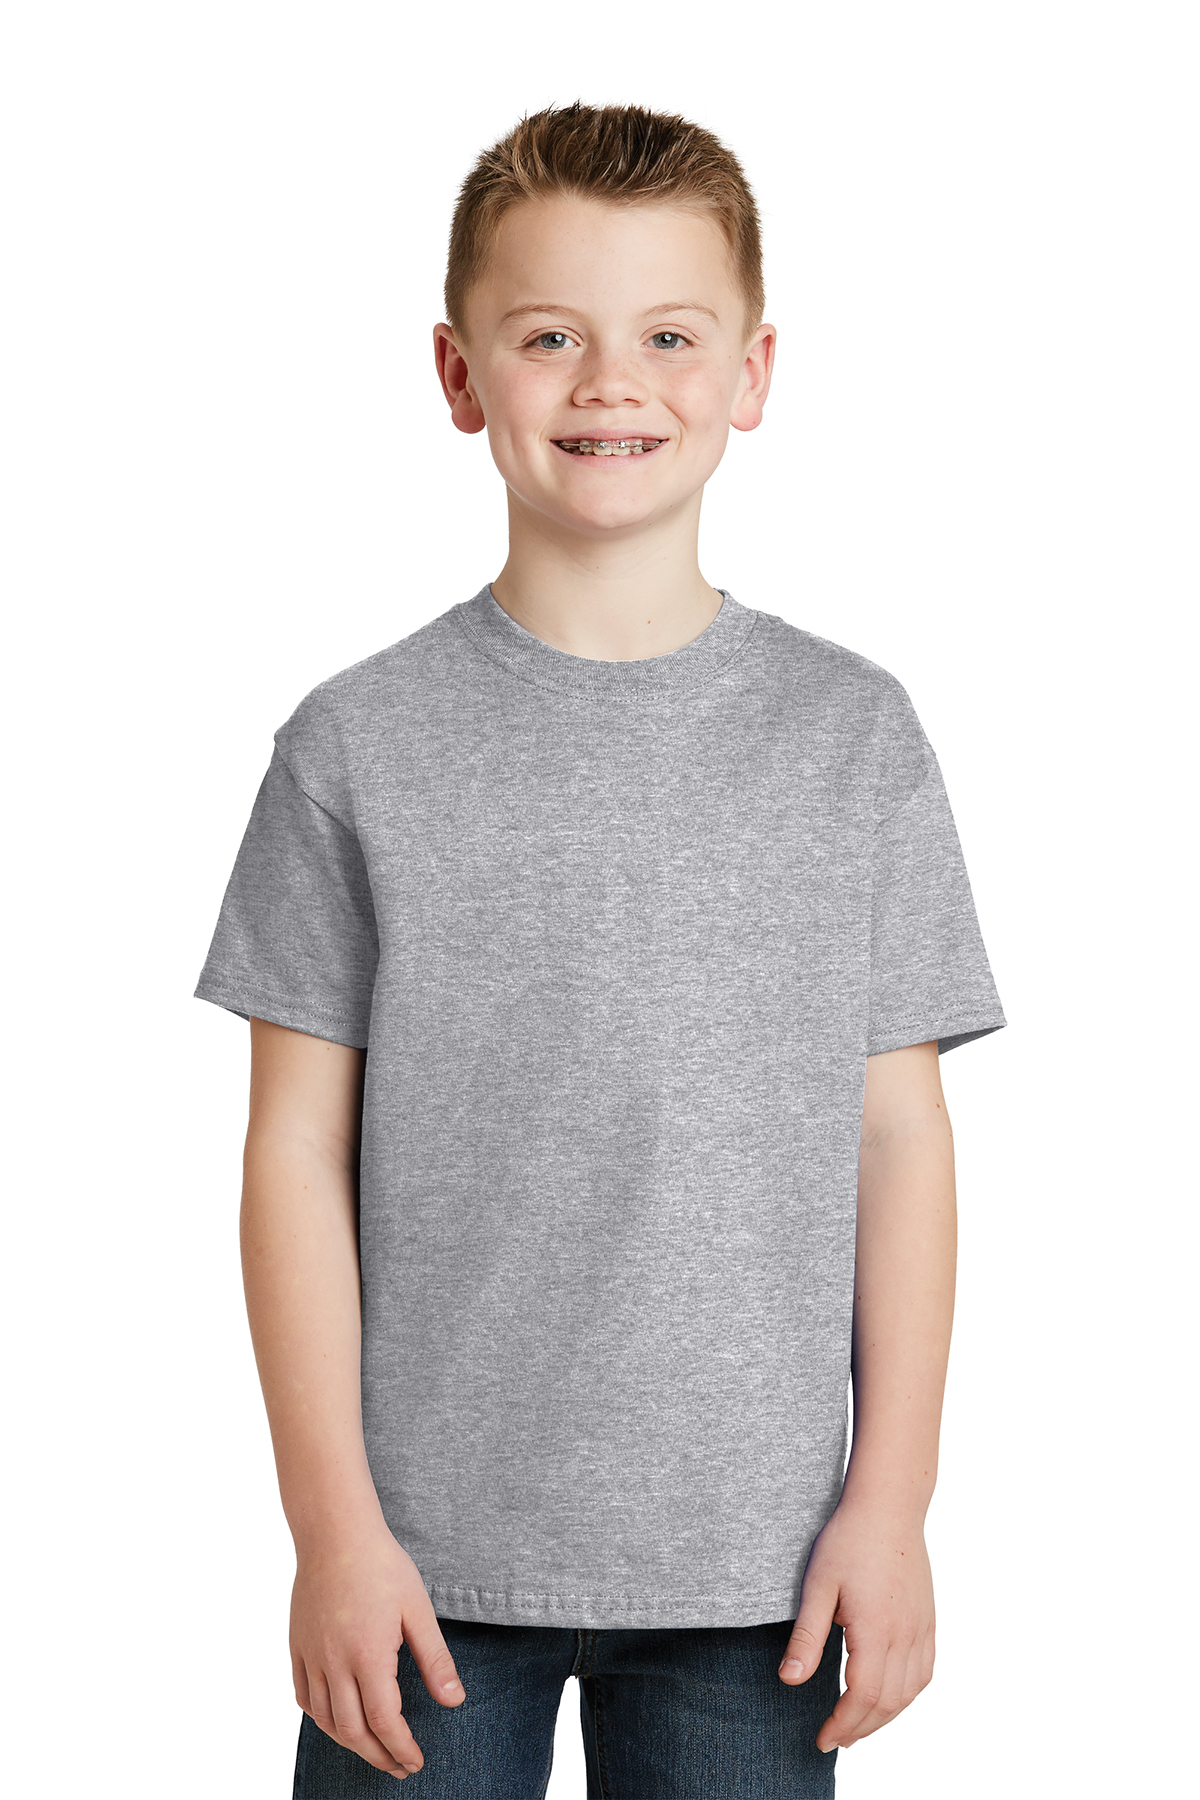 hanes t shirts for toddlers